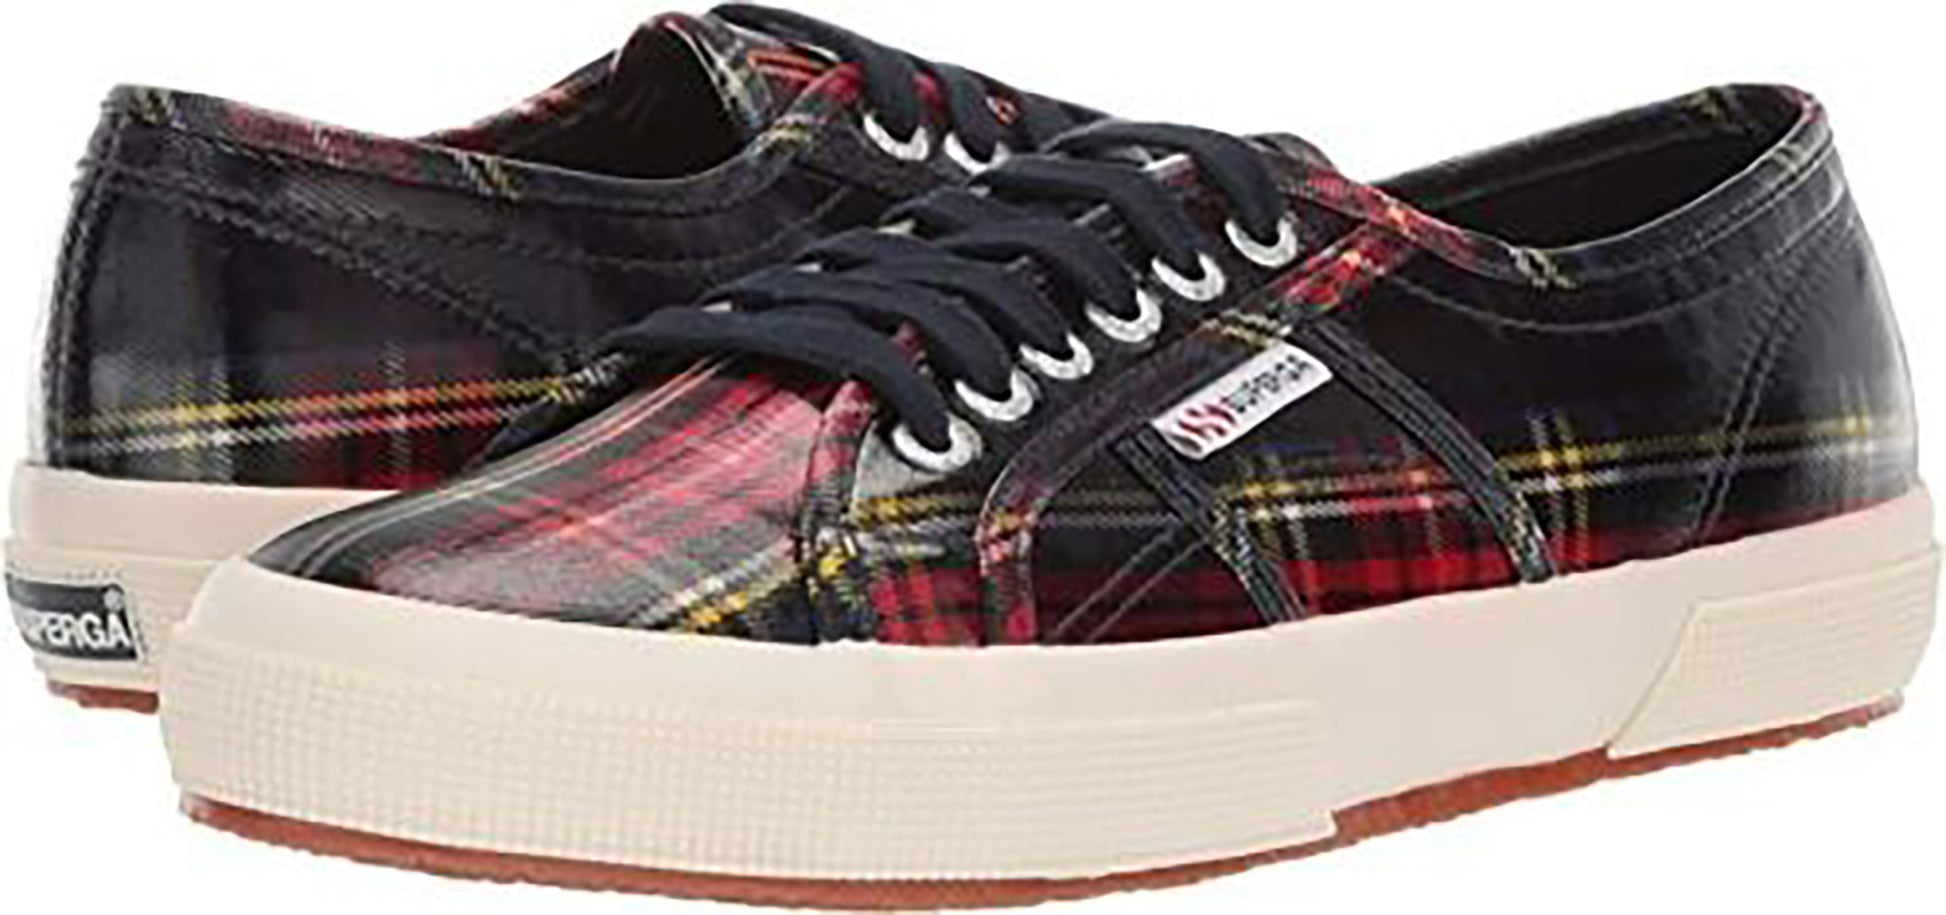 A pair of Superga 2750 Red Tartan Plaid sneakers featuring a lace-up closure with dark laces, and white synthetic rubber soles.